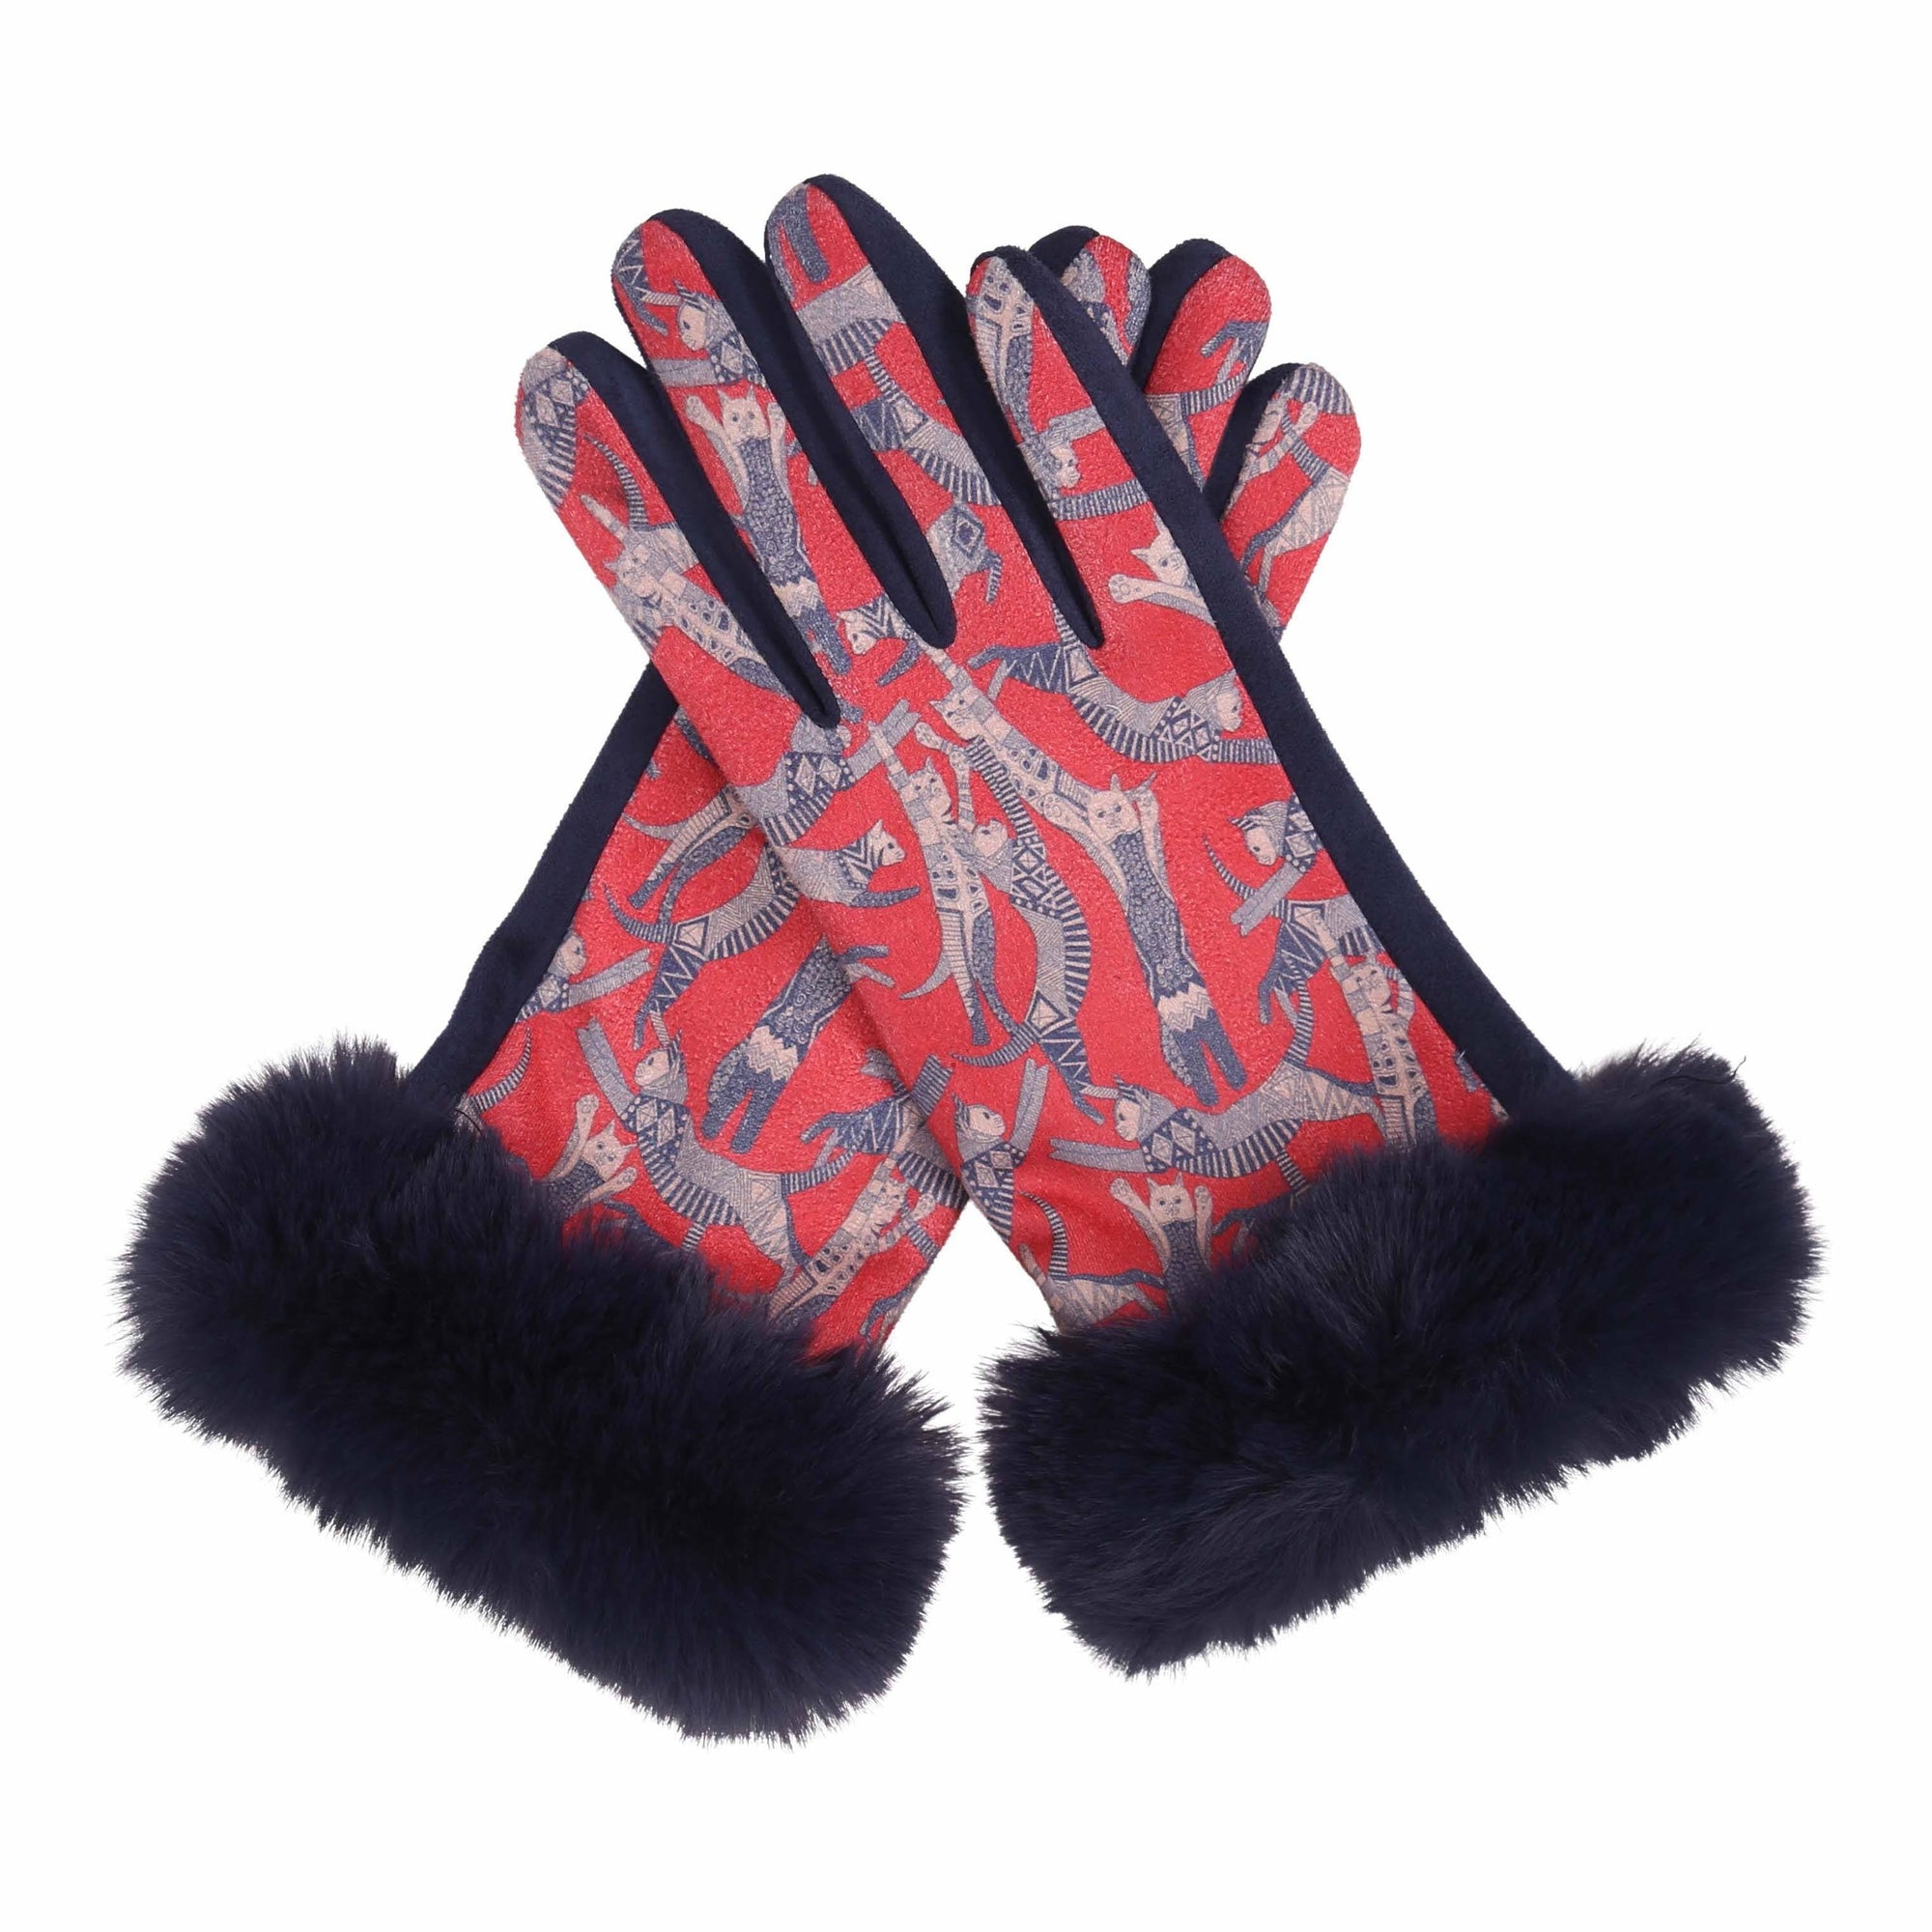 Pair of Navy and Cool Cats print texting gloves with black fake fur cuffs.